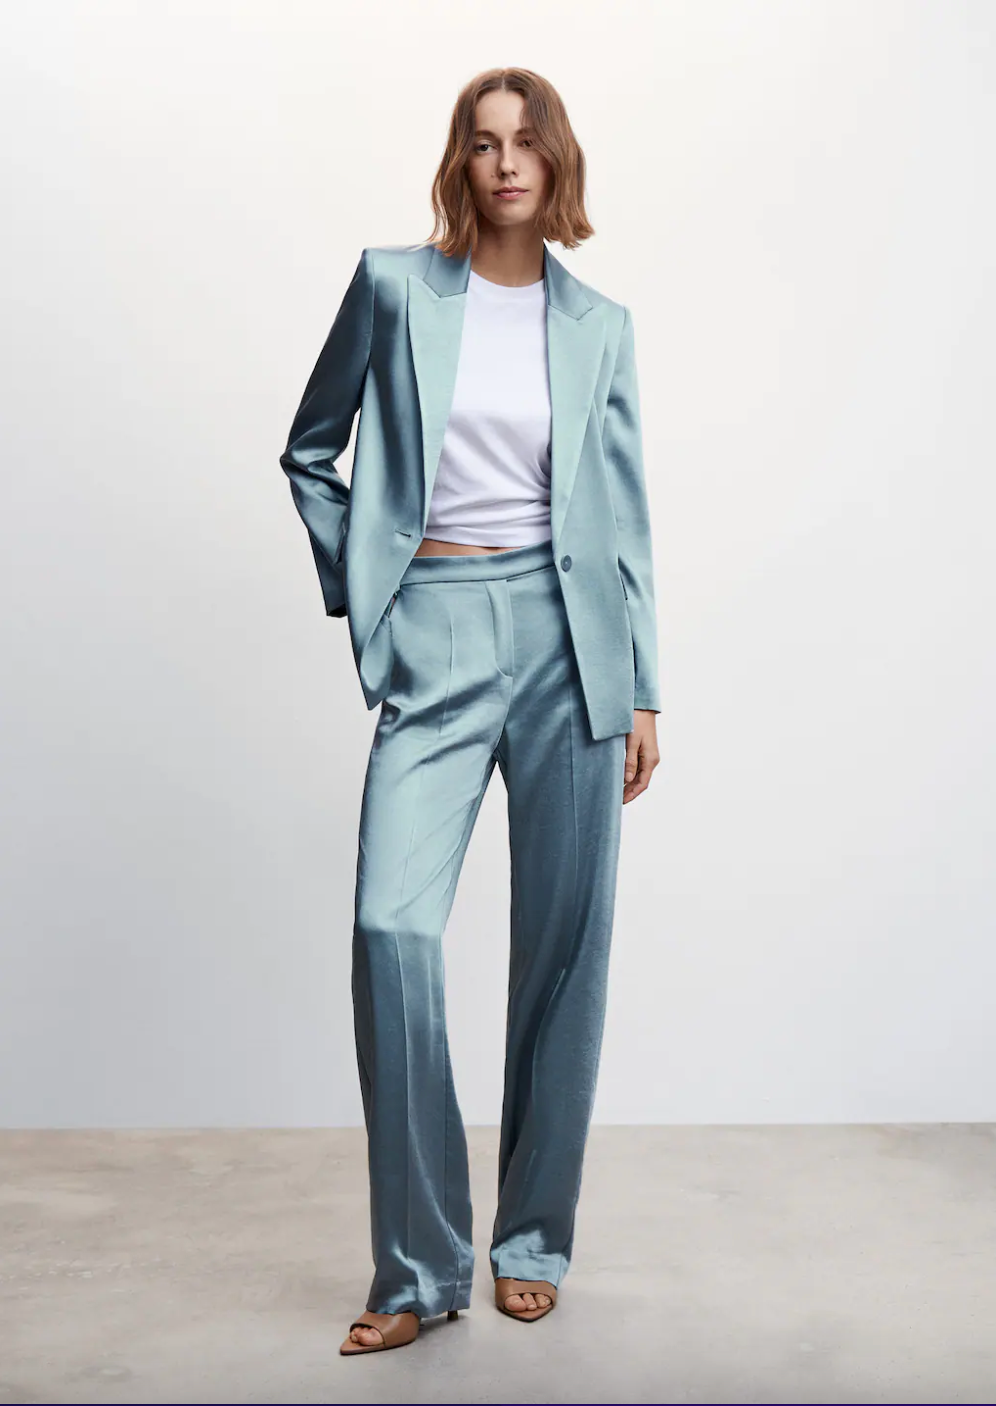 Formal Pant Suits for Women Business Suits for Work Wear Sets Gray Blazer  Ladies Office Uniform Styles… | Pant suits for women, Suits for women,  Pantsuits for women